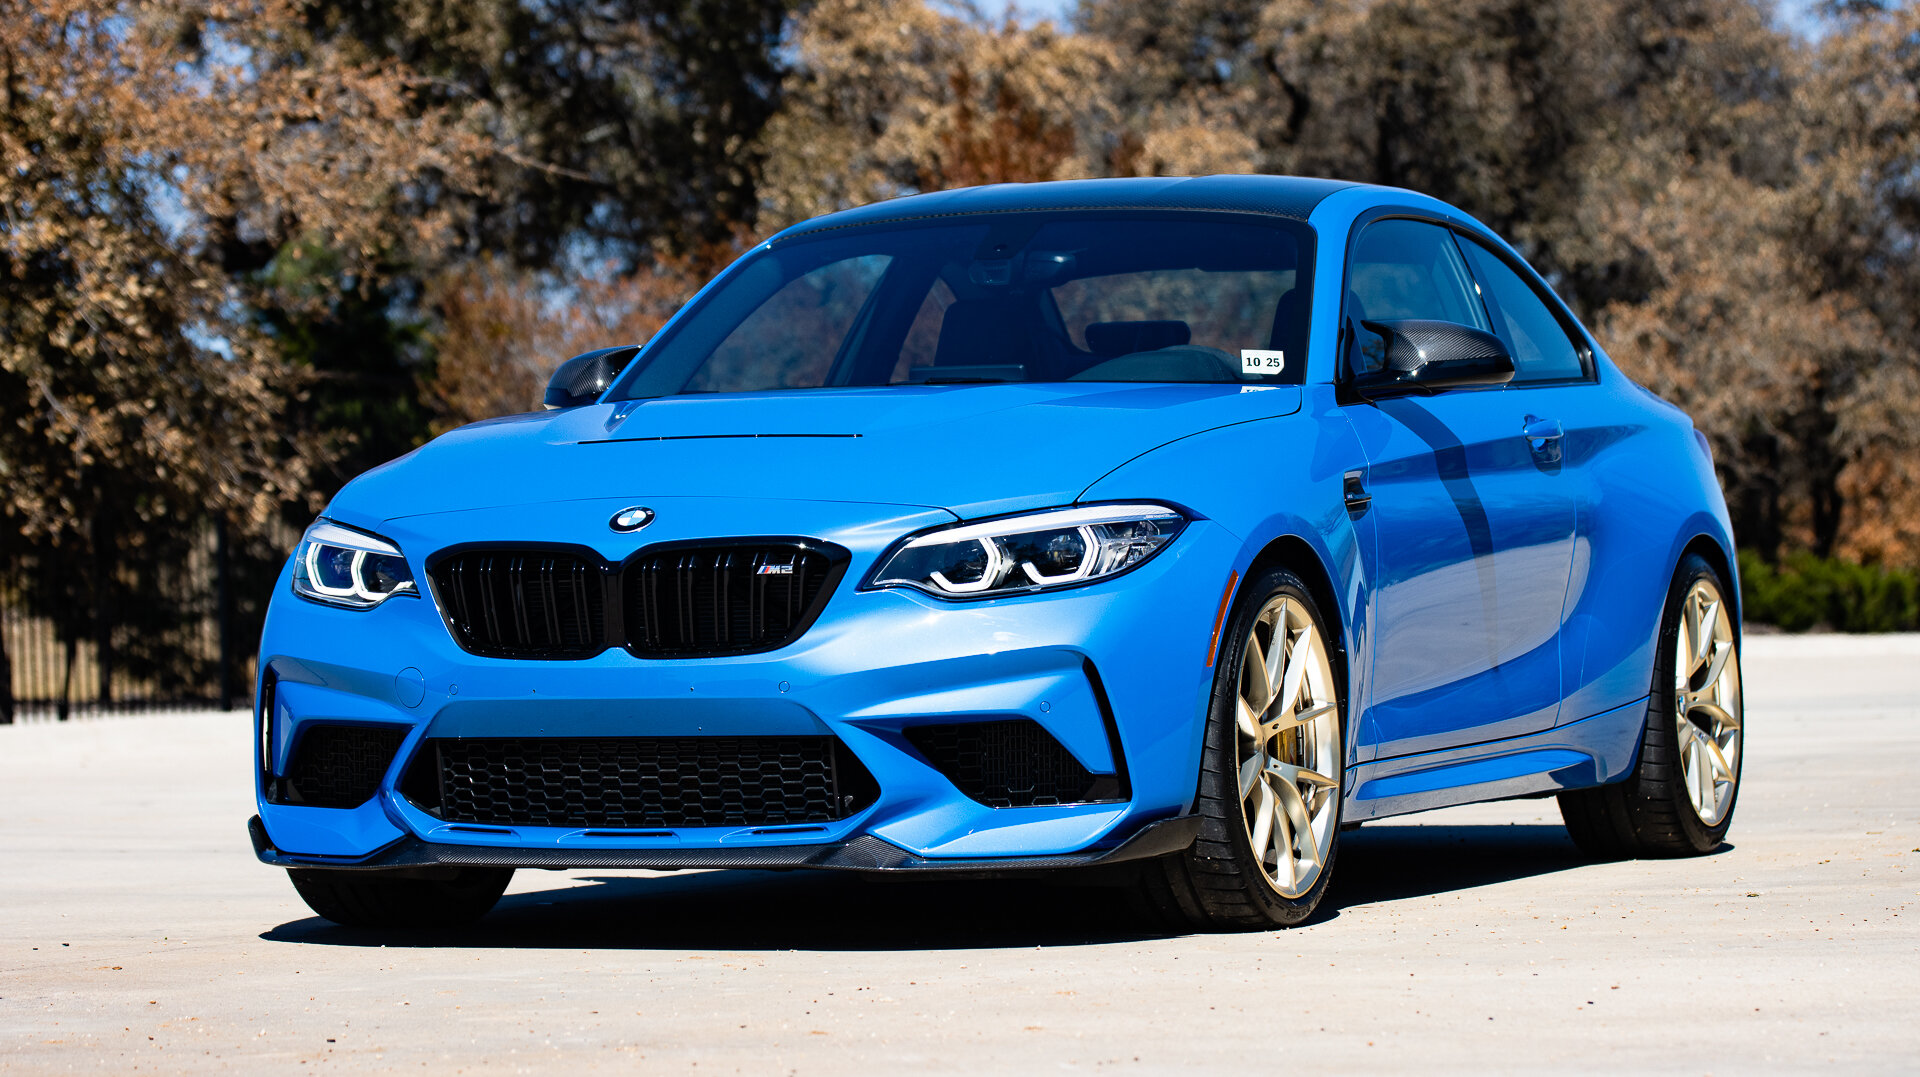 2020 BMW M2 CS review: One-upping itself - CNET